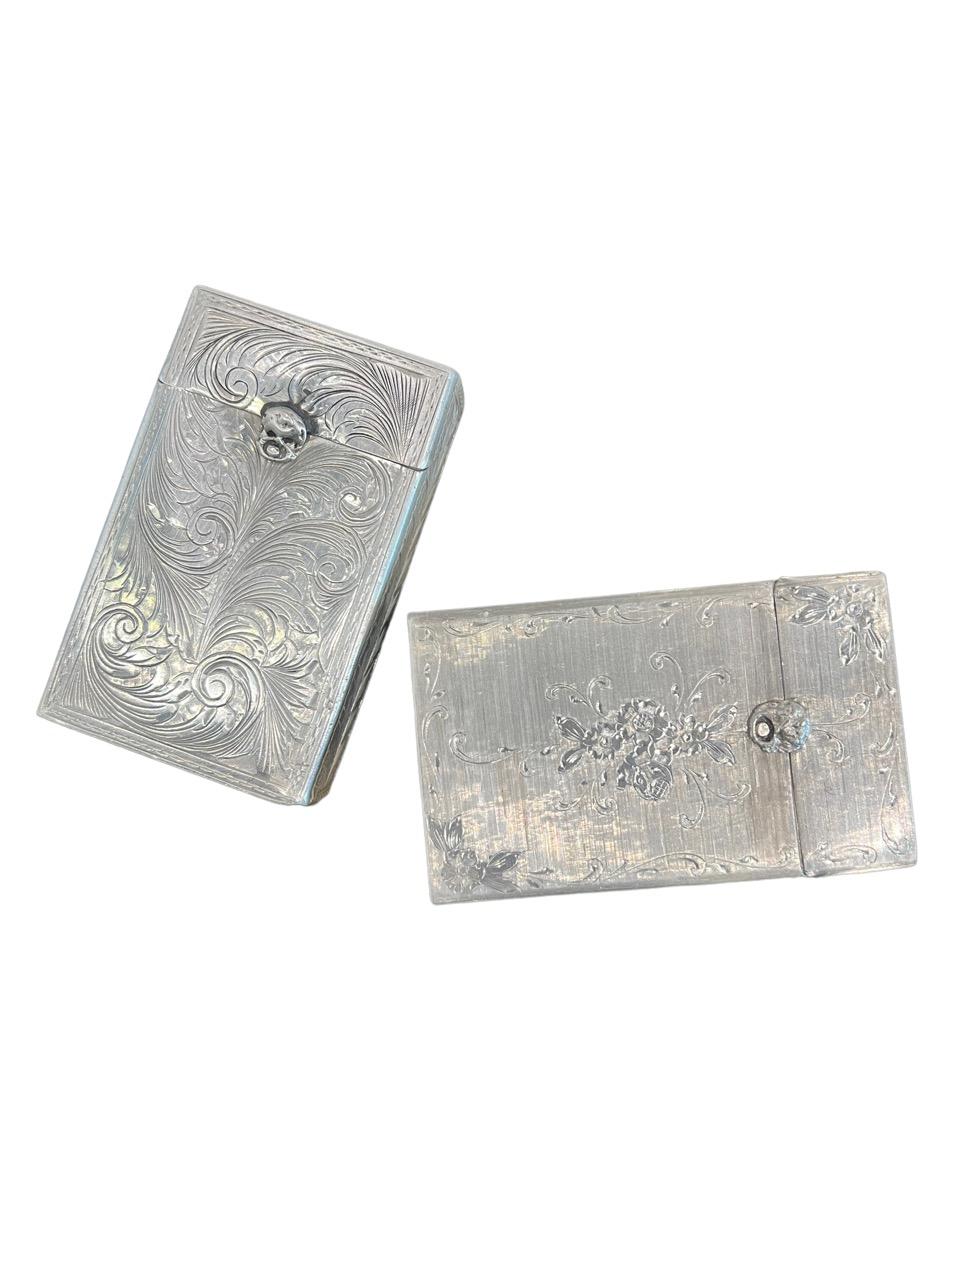 Cast Set of two Sterling Silver Cigarette Cases 19th and 20 Century, Mario Buccellat For Sale